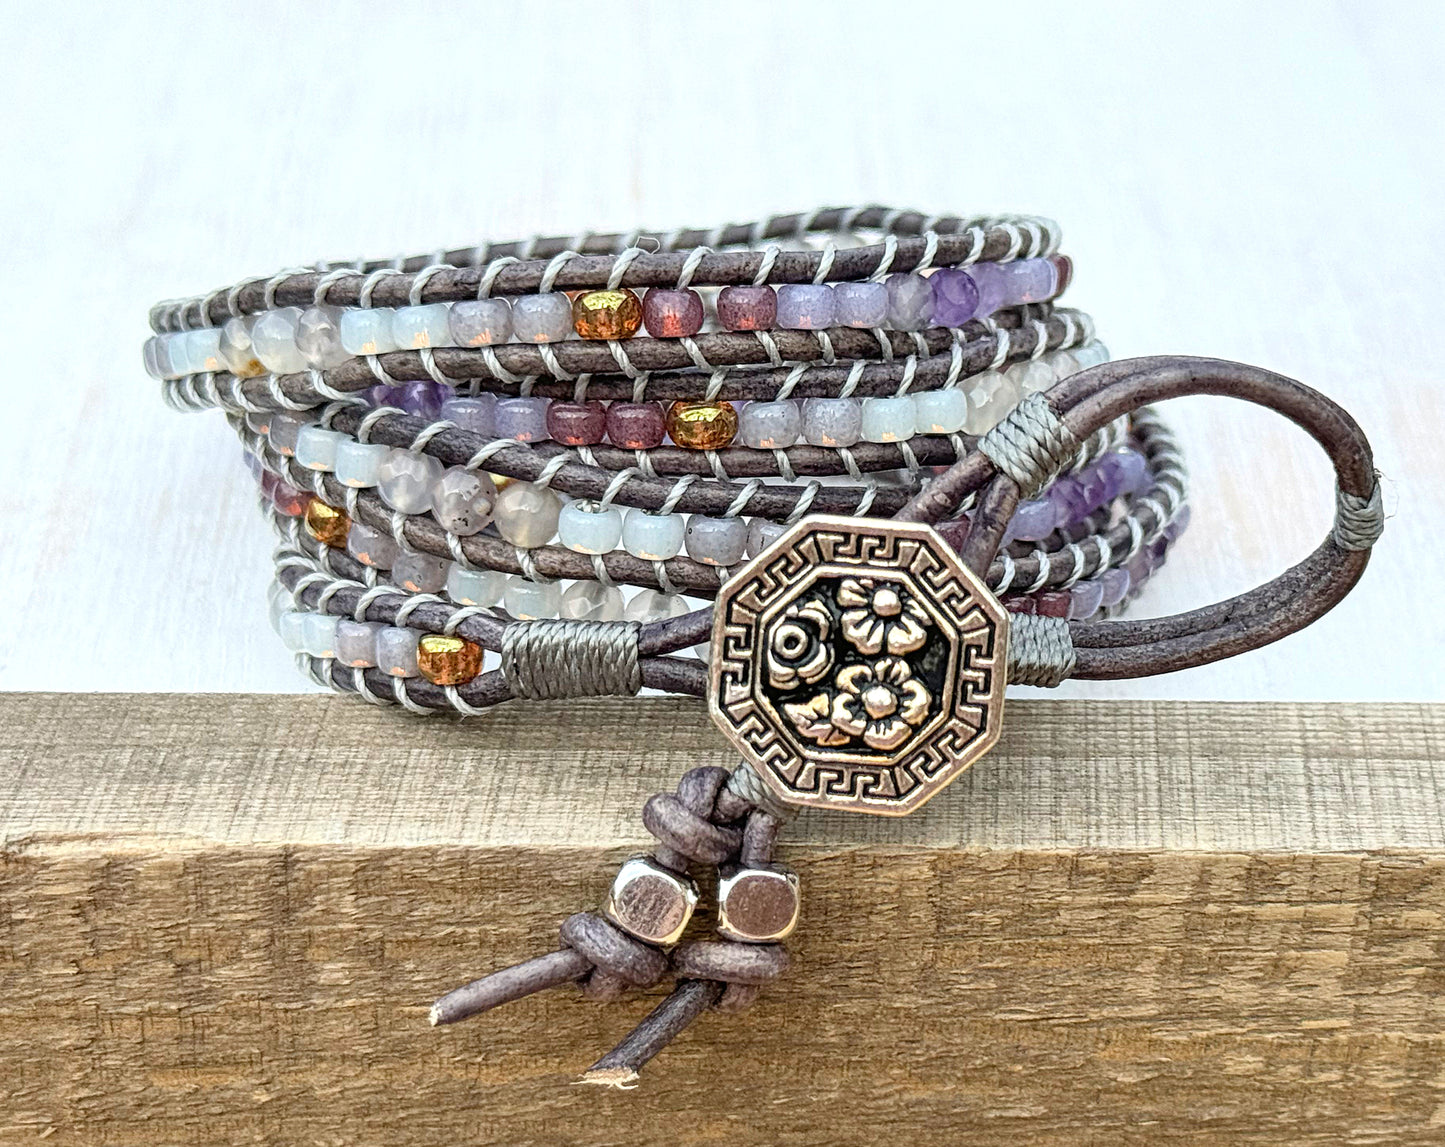 Leather Beaded 5x wrap bracelet with Amathyst and Gray Agate